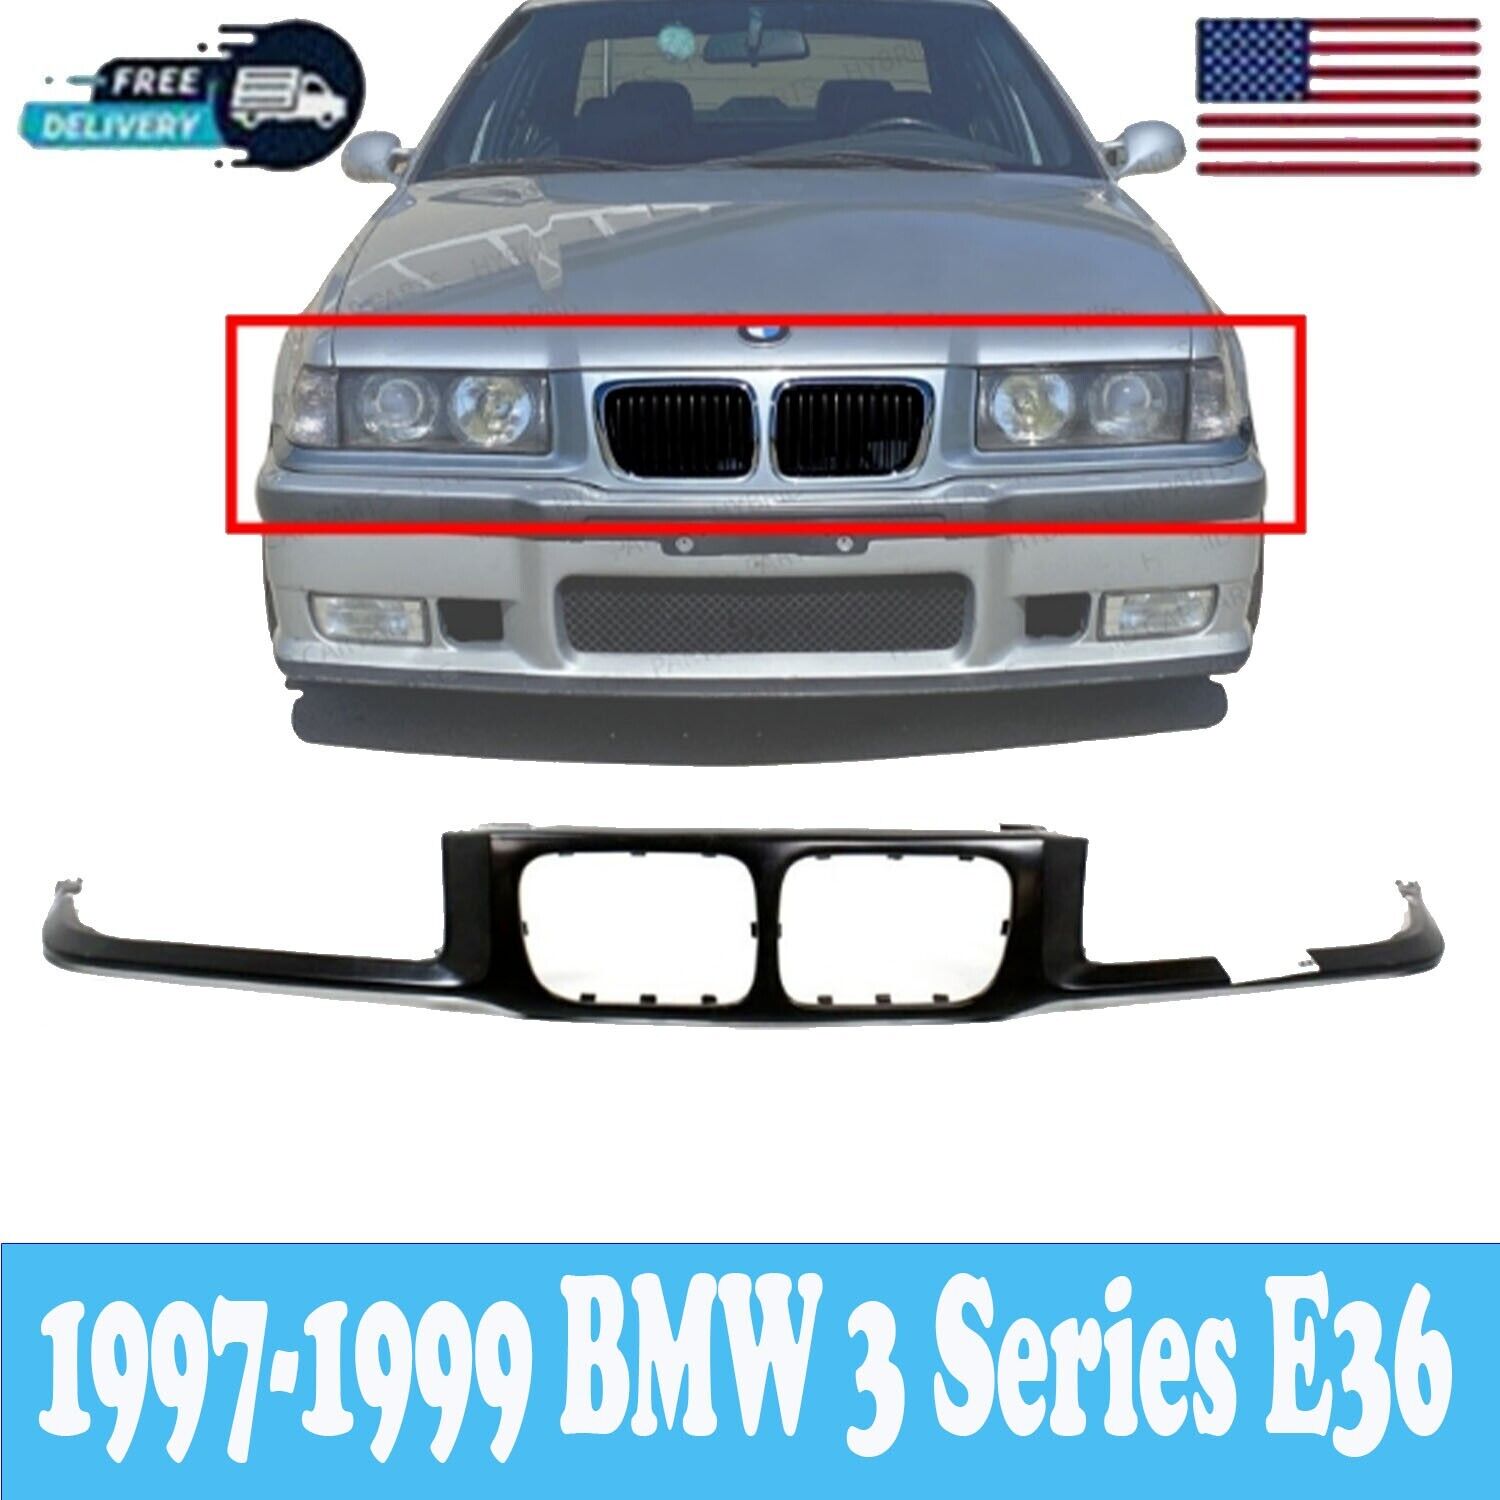 New Header Headlight Grille Mounting Nose Panel For 1997-1999 BMW 3 Series E36..